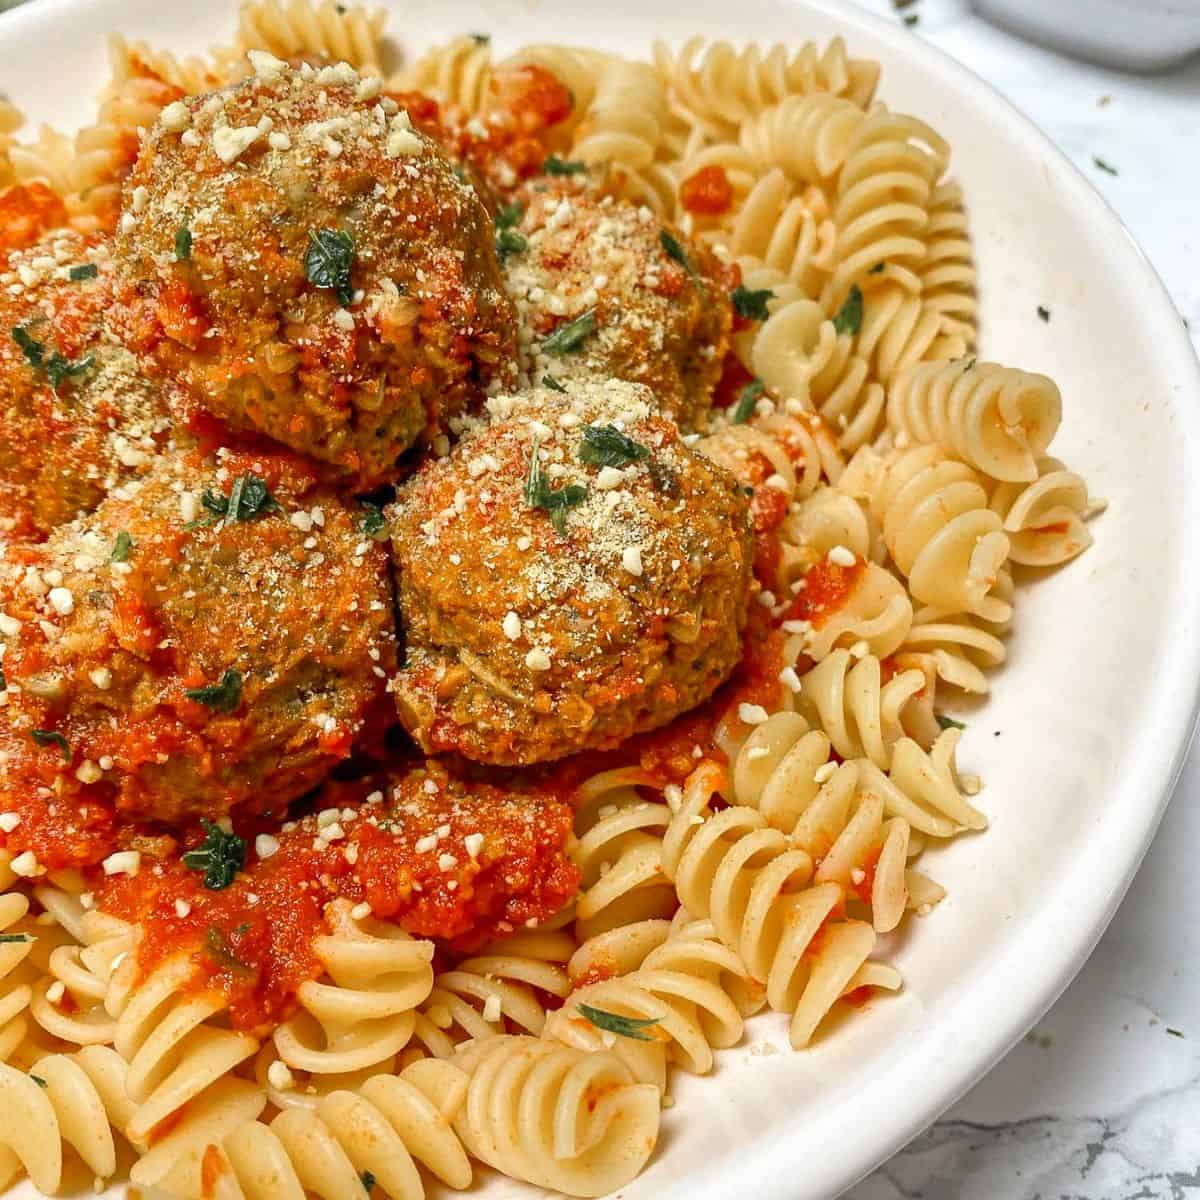 Plate of pasta with vegan meatballs and tomato sauce on top.